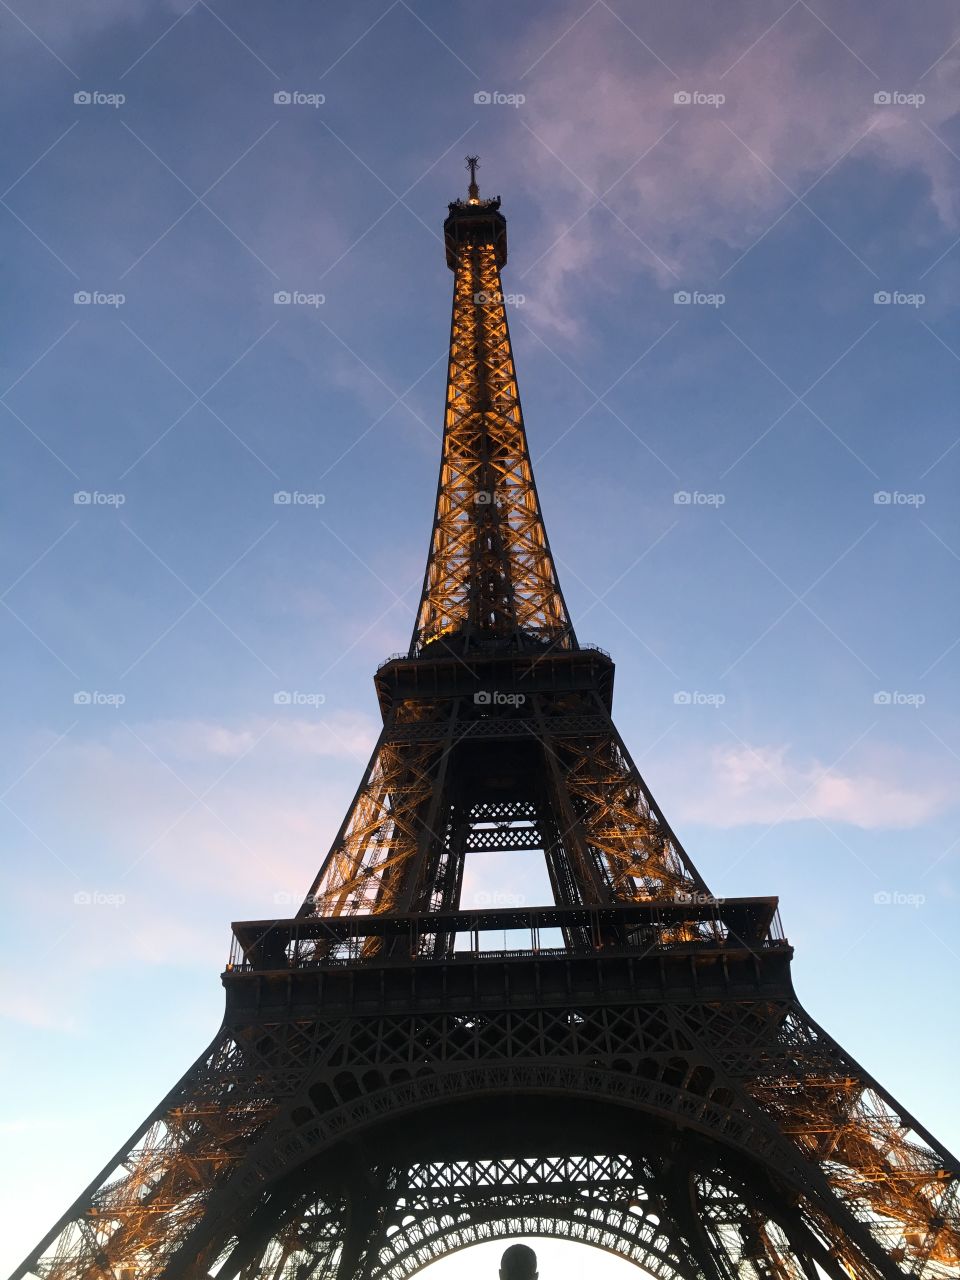 Architecture, No Person, Travel, Sky, Tower